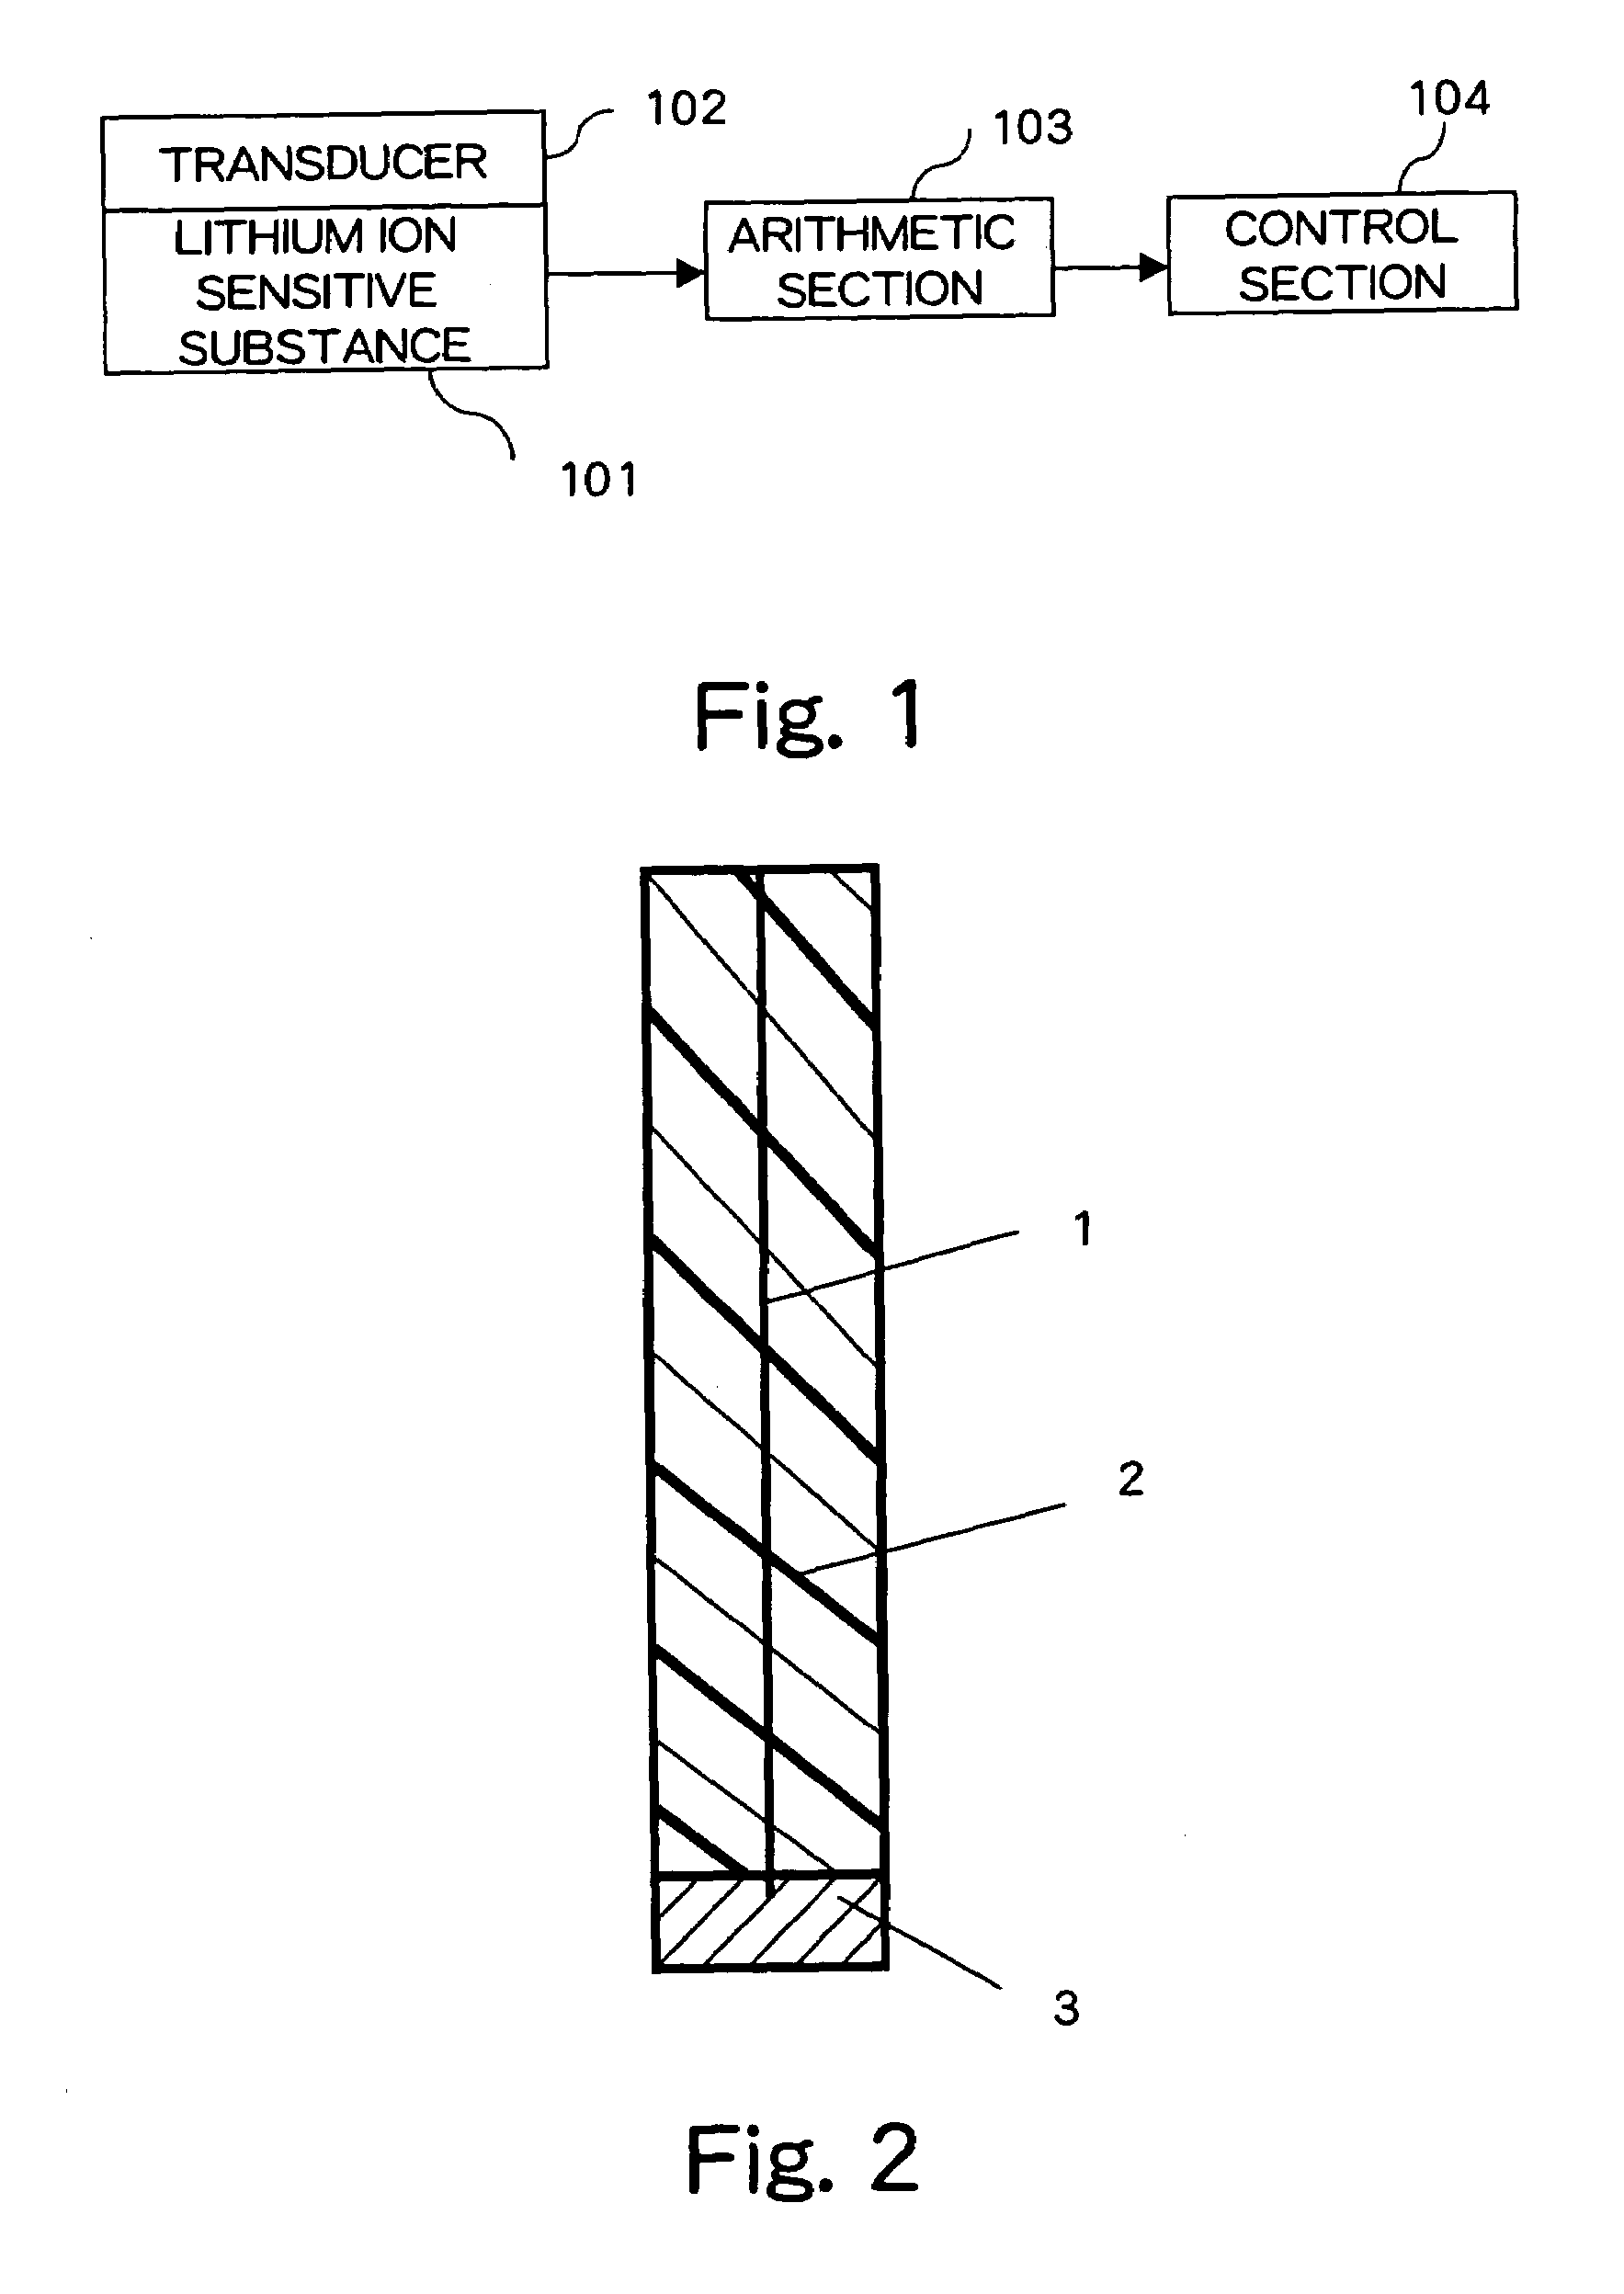 Method and apparatus for controlling concentration of water treatment chemicals